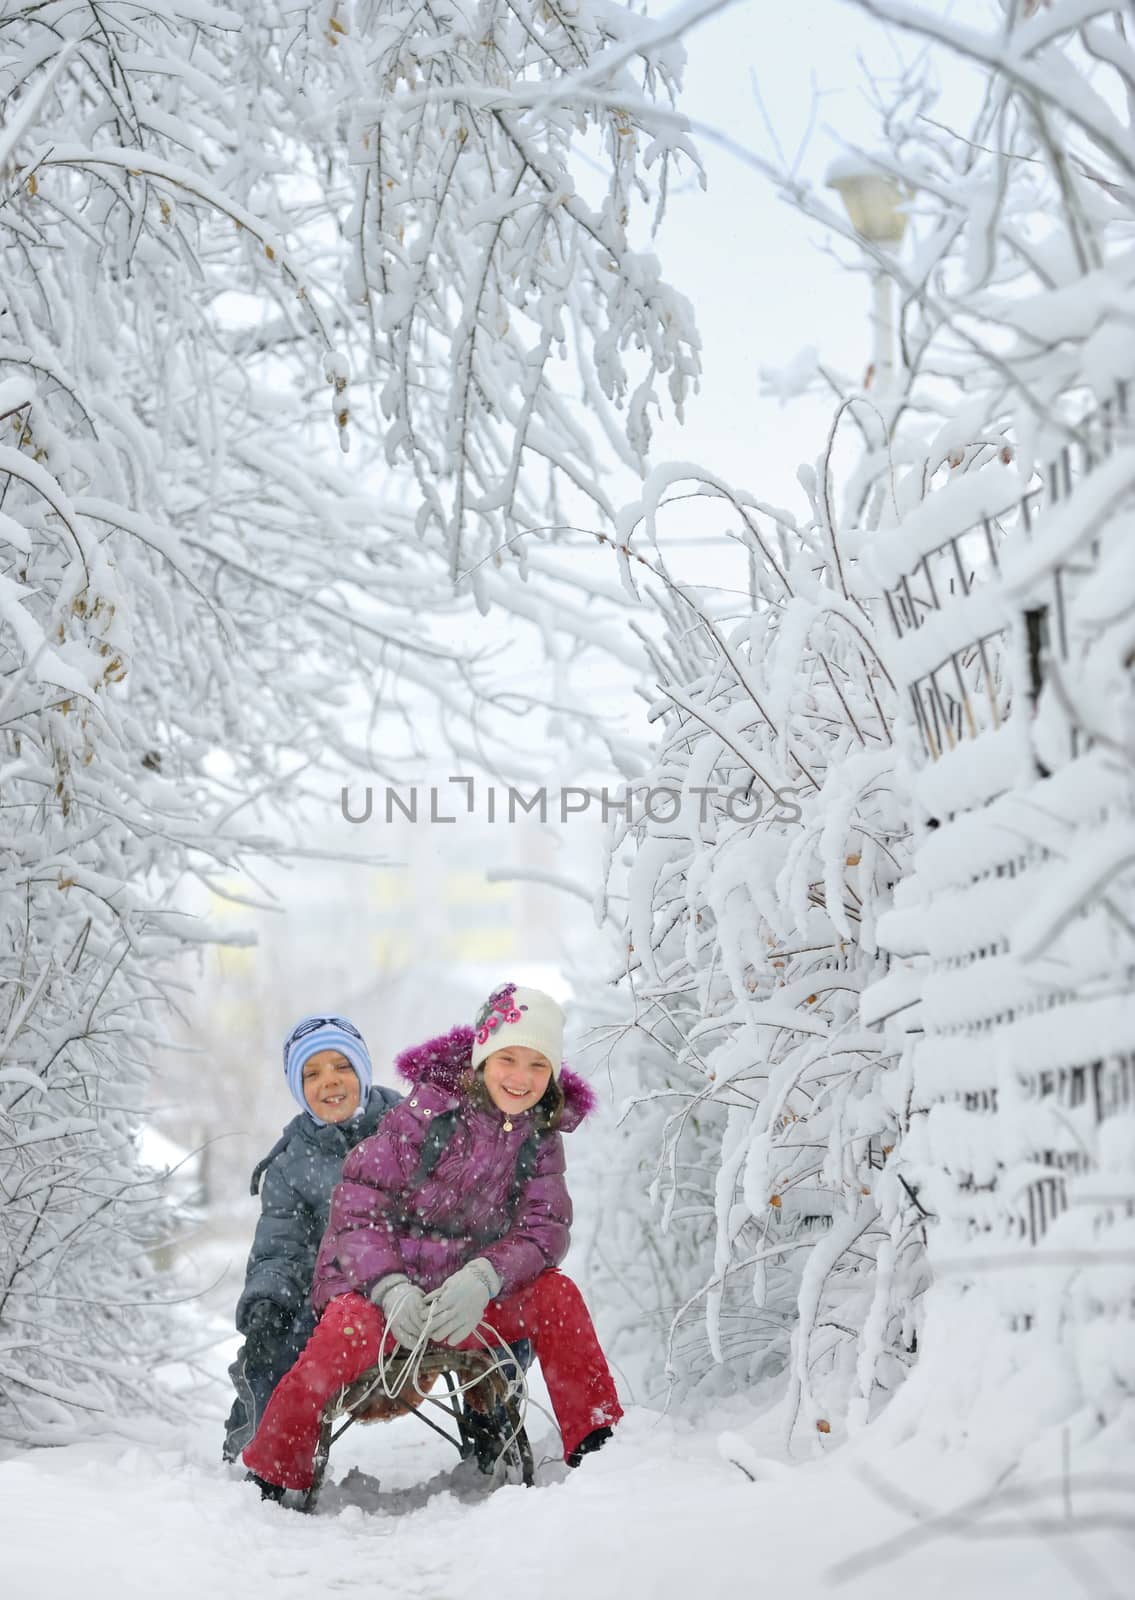 Boy And Girl at sledging Through Snowy by mady70